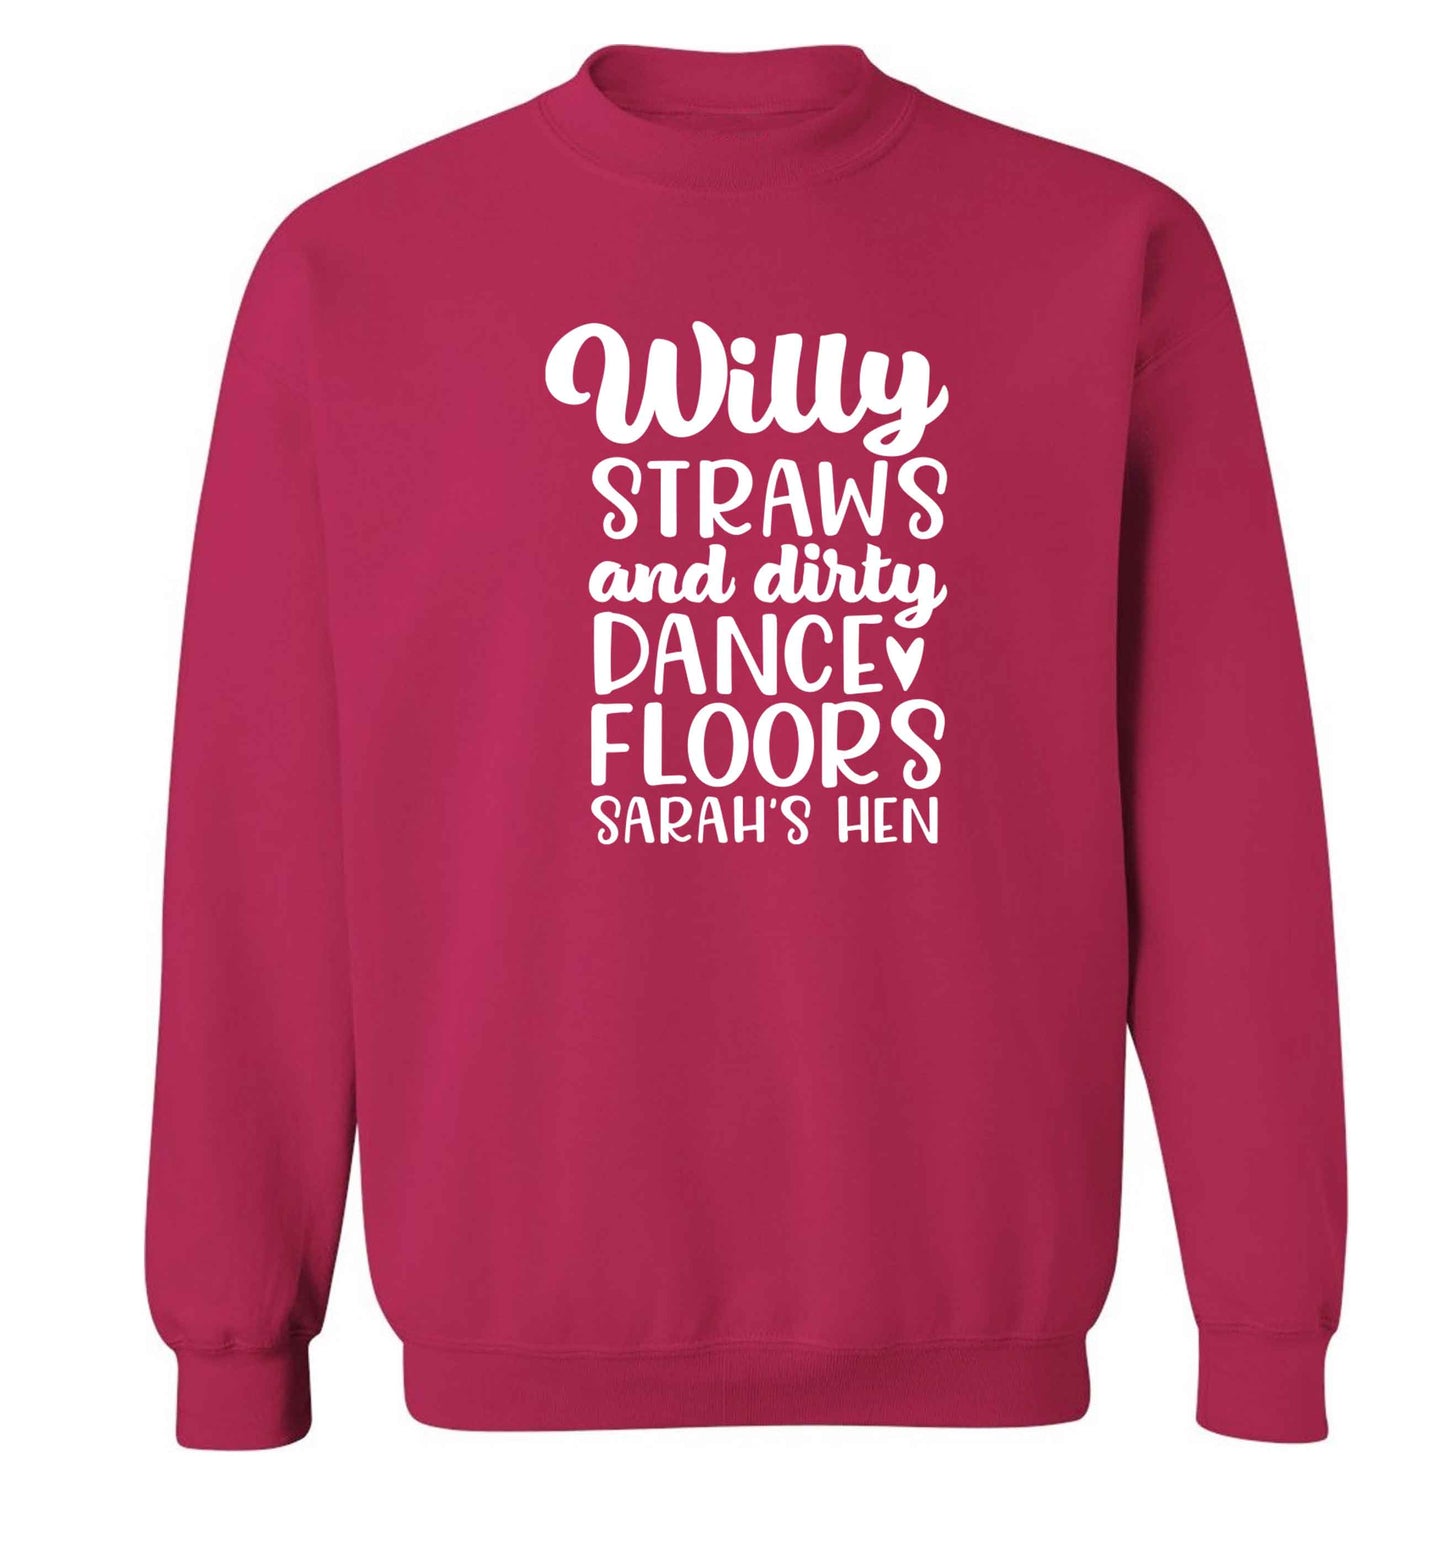 Willy straws and dirty dance floors adult's unisex pink sweater 2XL